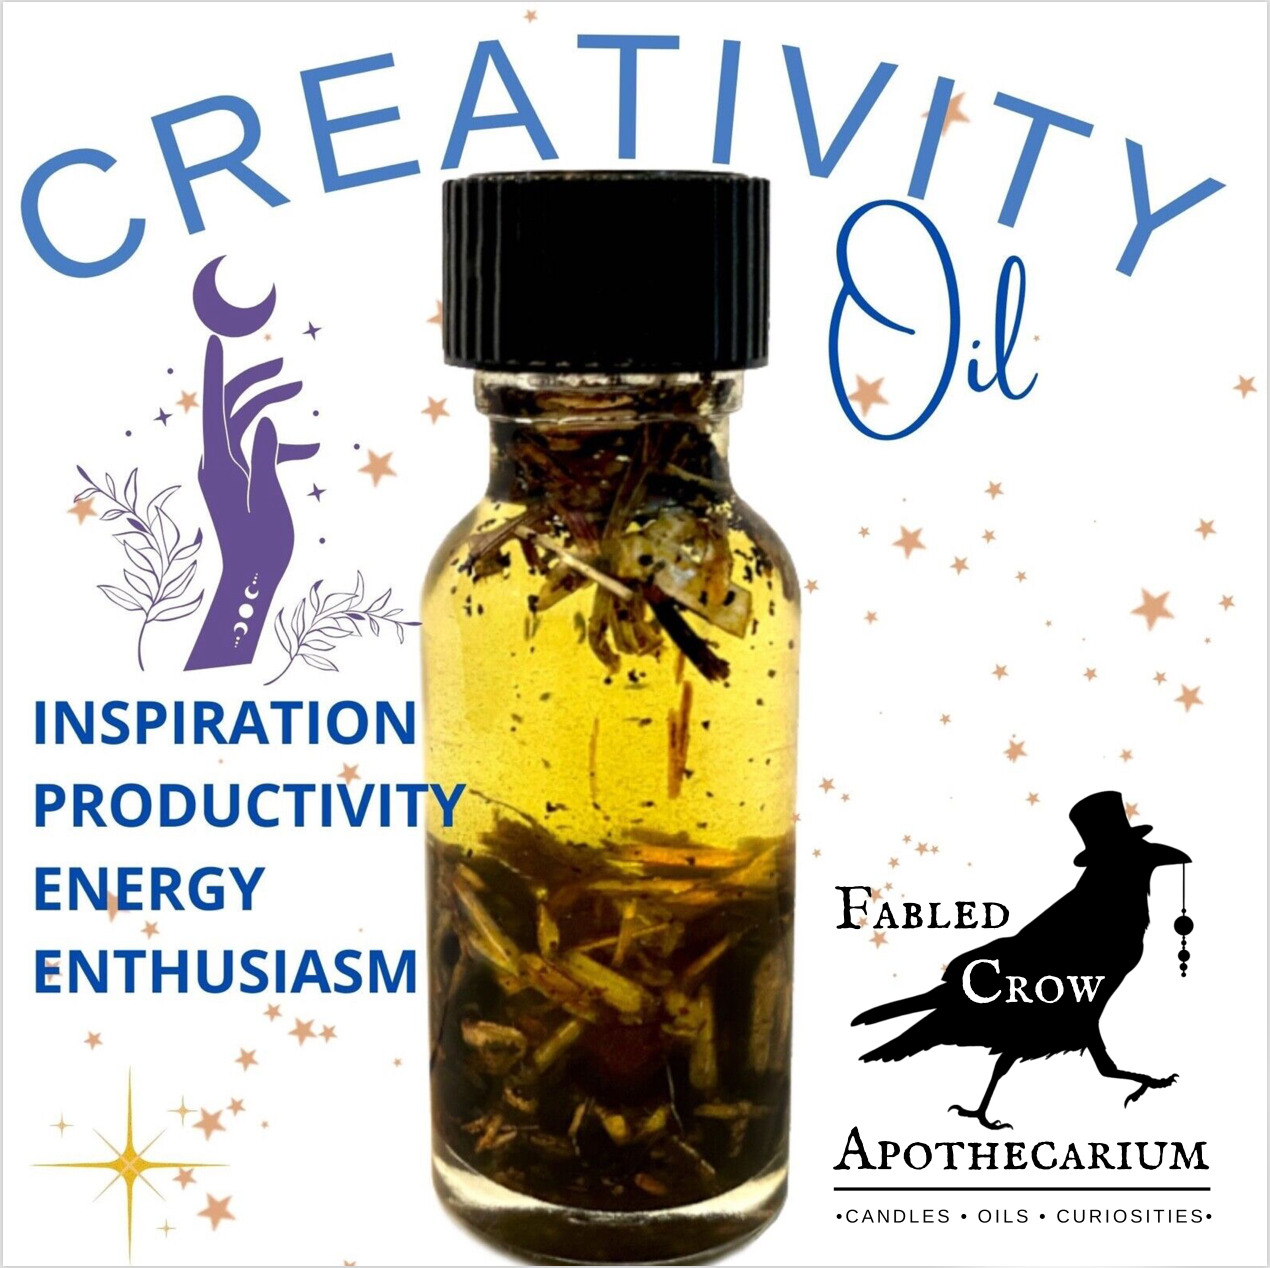 CREATIVITY Oil Inspiration Energy Productivity Arts Witch Pagan FABLED CROW